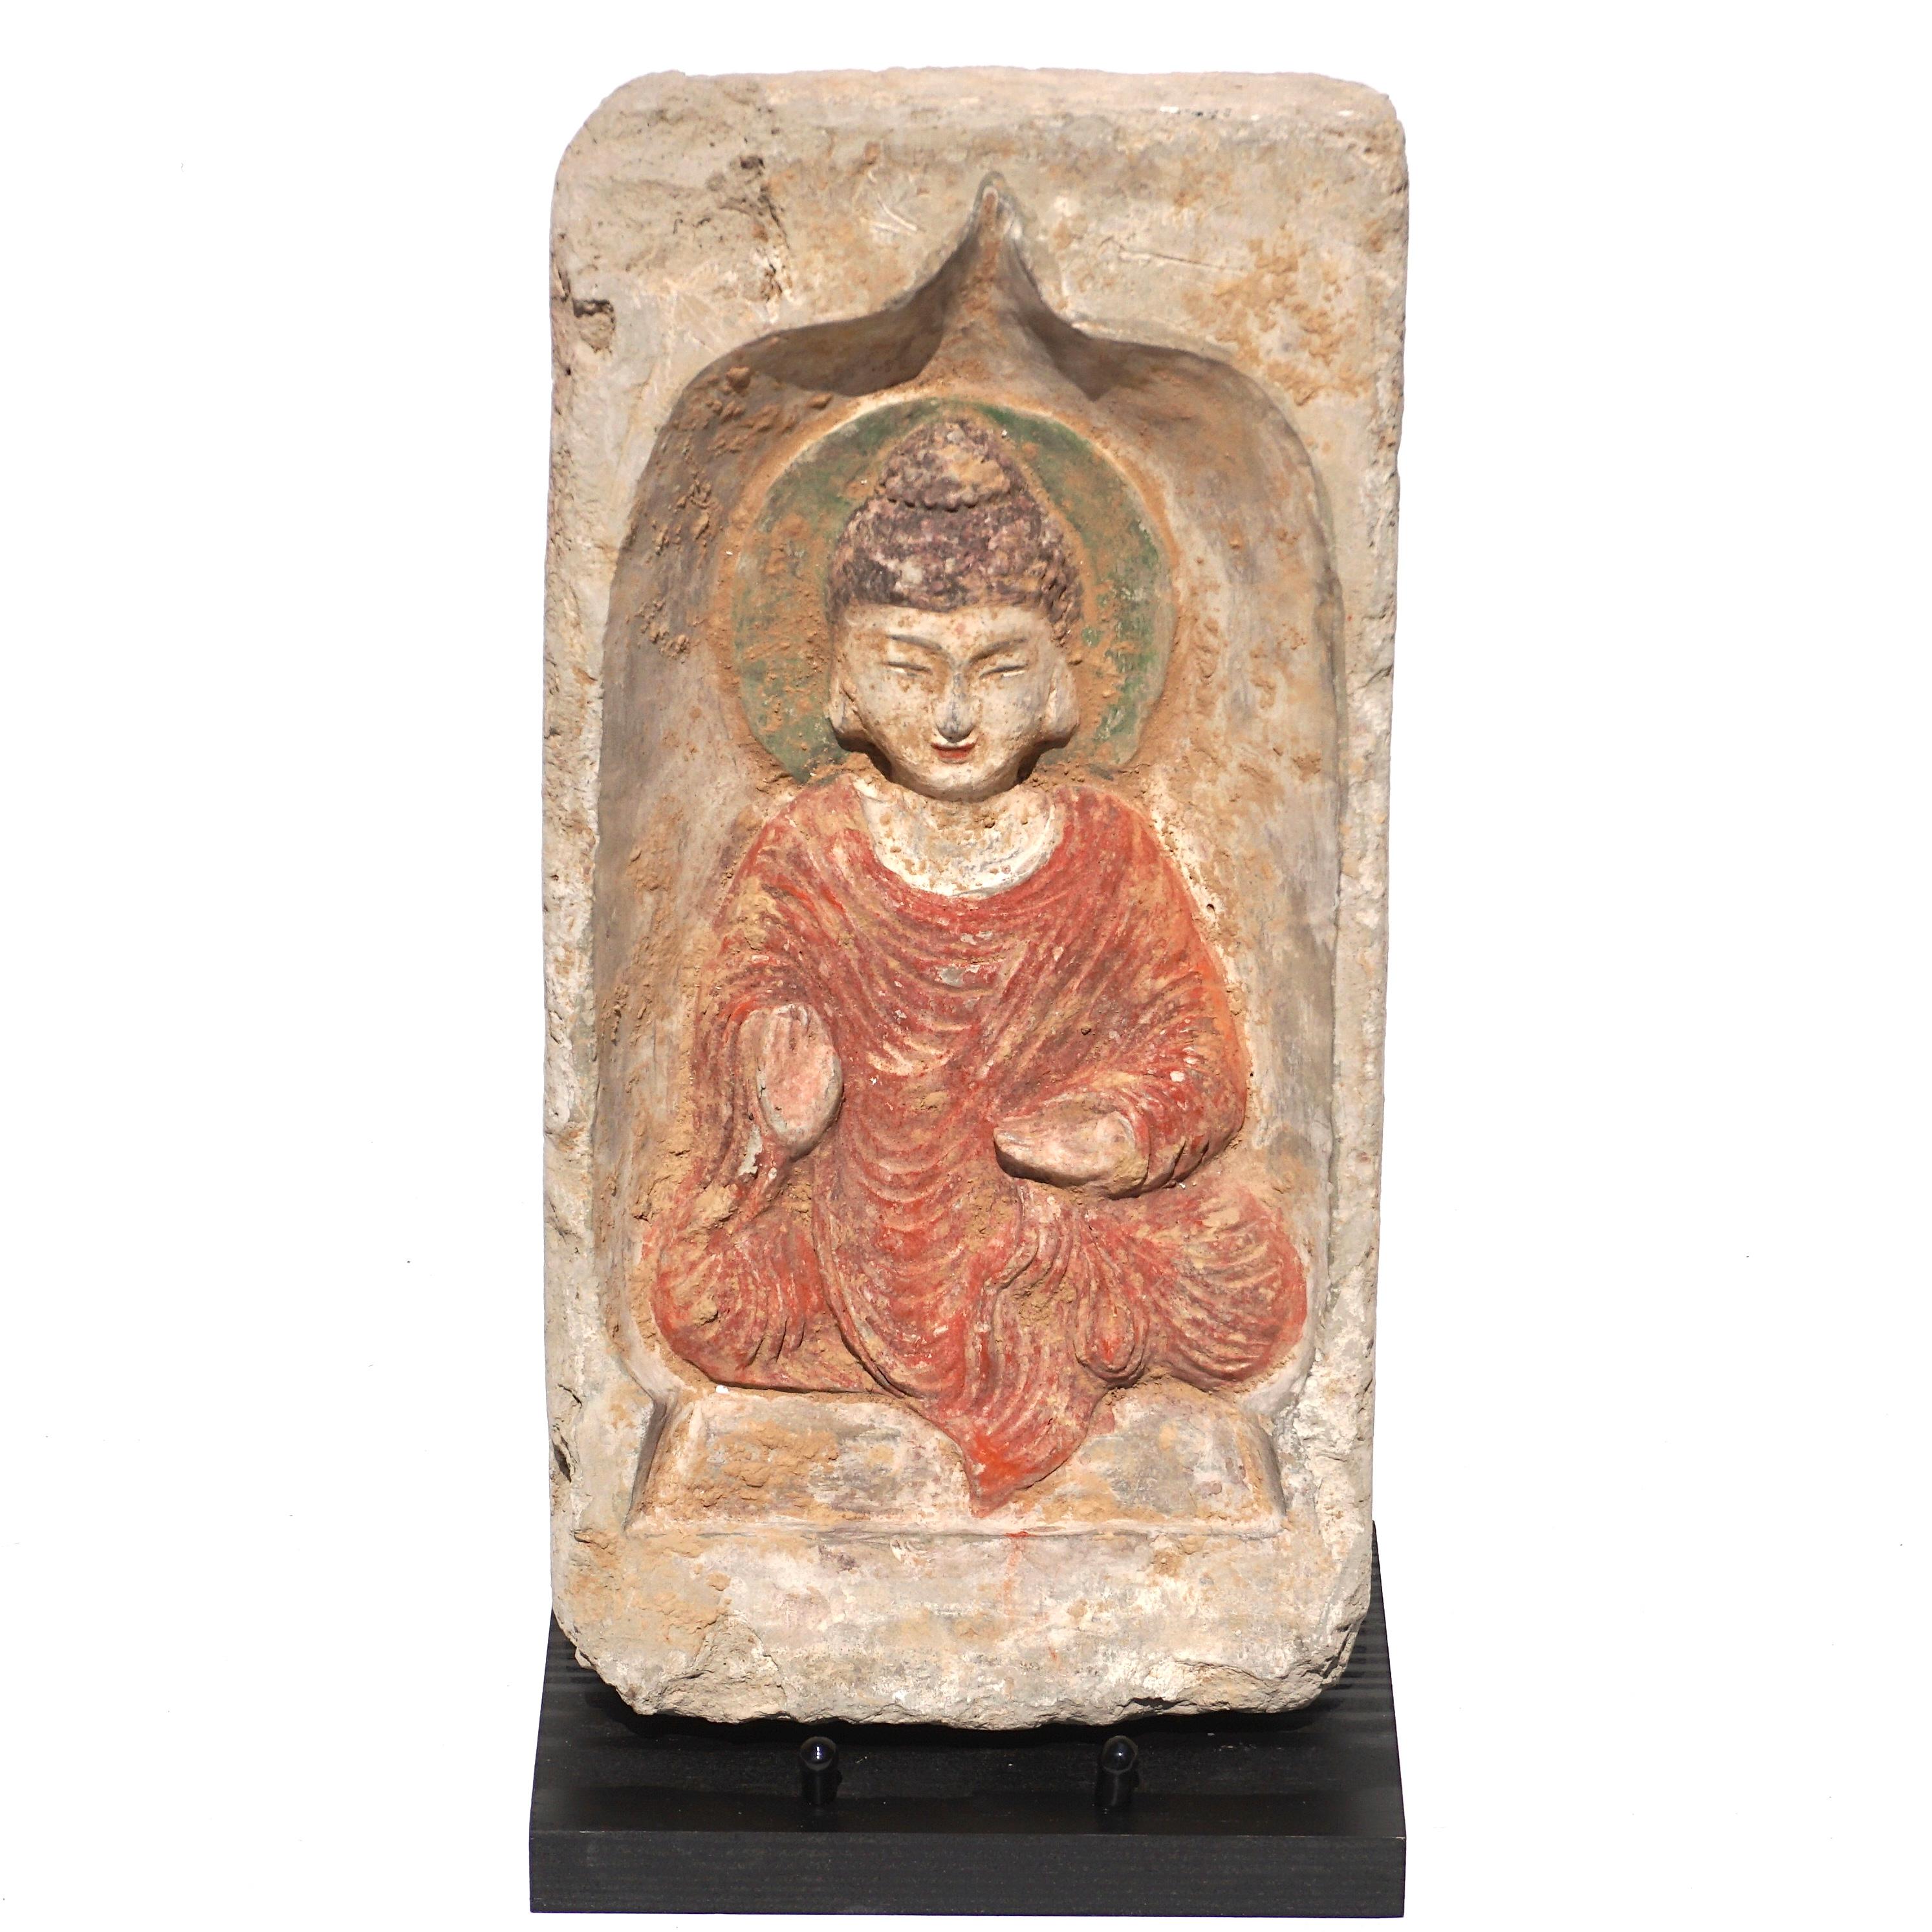 C. 386-534 AD. Chinese Northern Wei Dynasty. 

A pre Tang Dynasty terracotta brick in a cream-coloured fabric featuring a beautiful depiction of a seated Buddha with a red robe, black hair and green halo. The figure has a raised right hand, with the